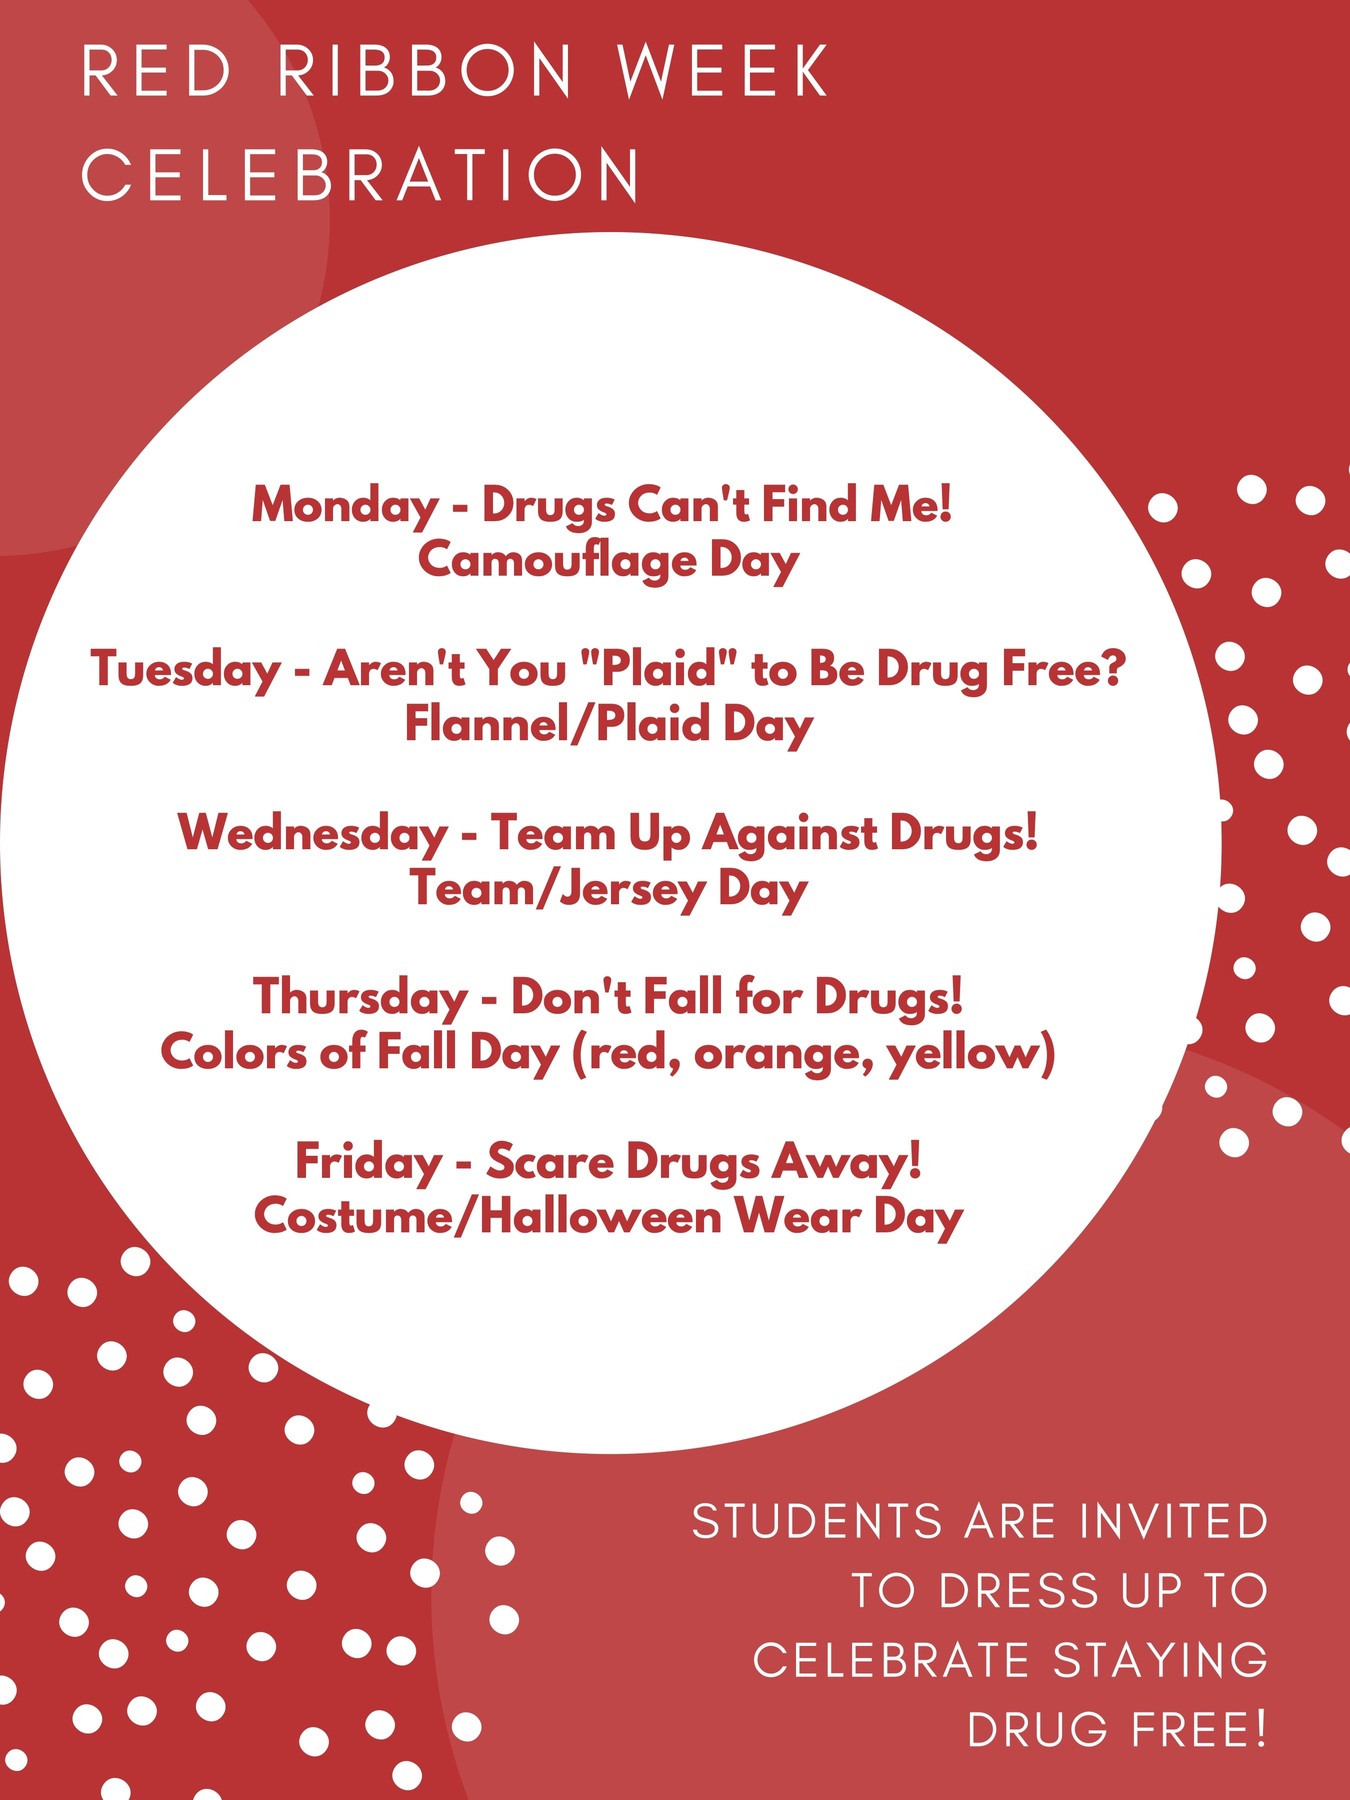 Department of Social Work hosts community awareness events to observe  National Red Ribbon Week